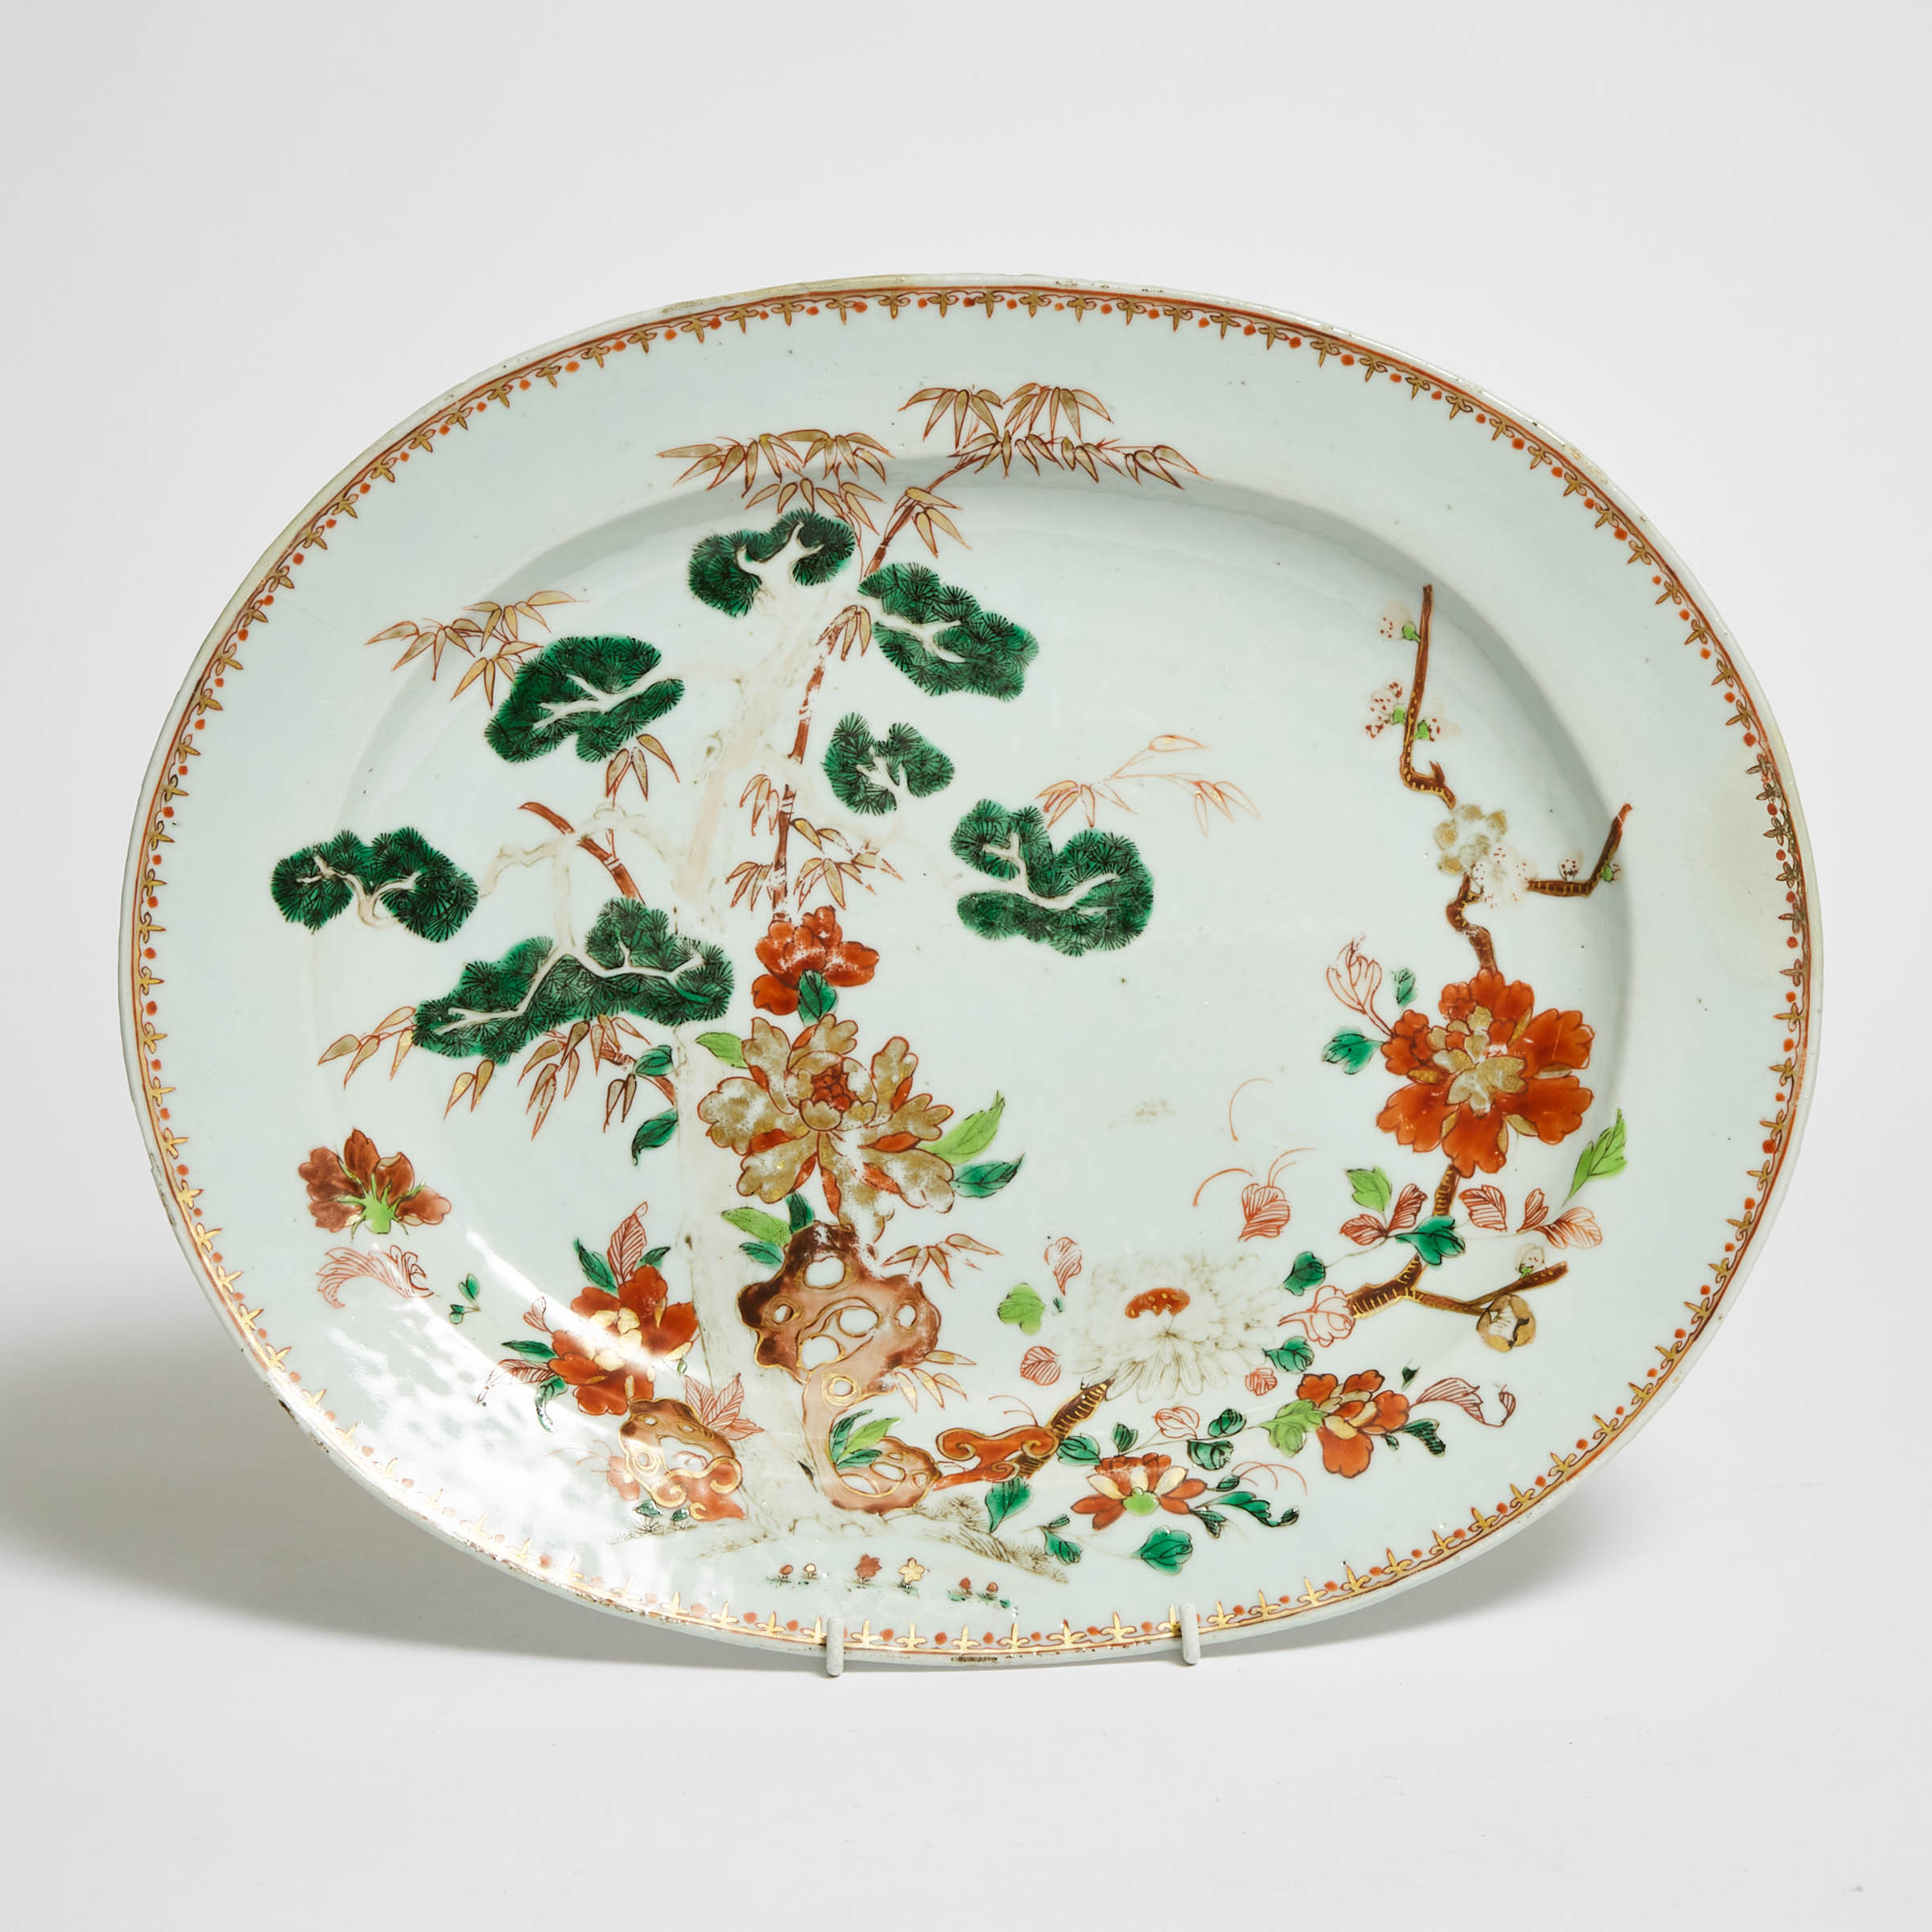 A Large Chinese Export 'Three Friends of Winter' Oval Platter, 18th Century